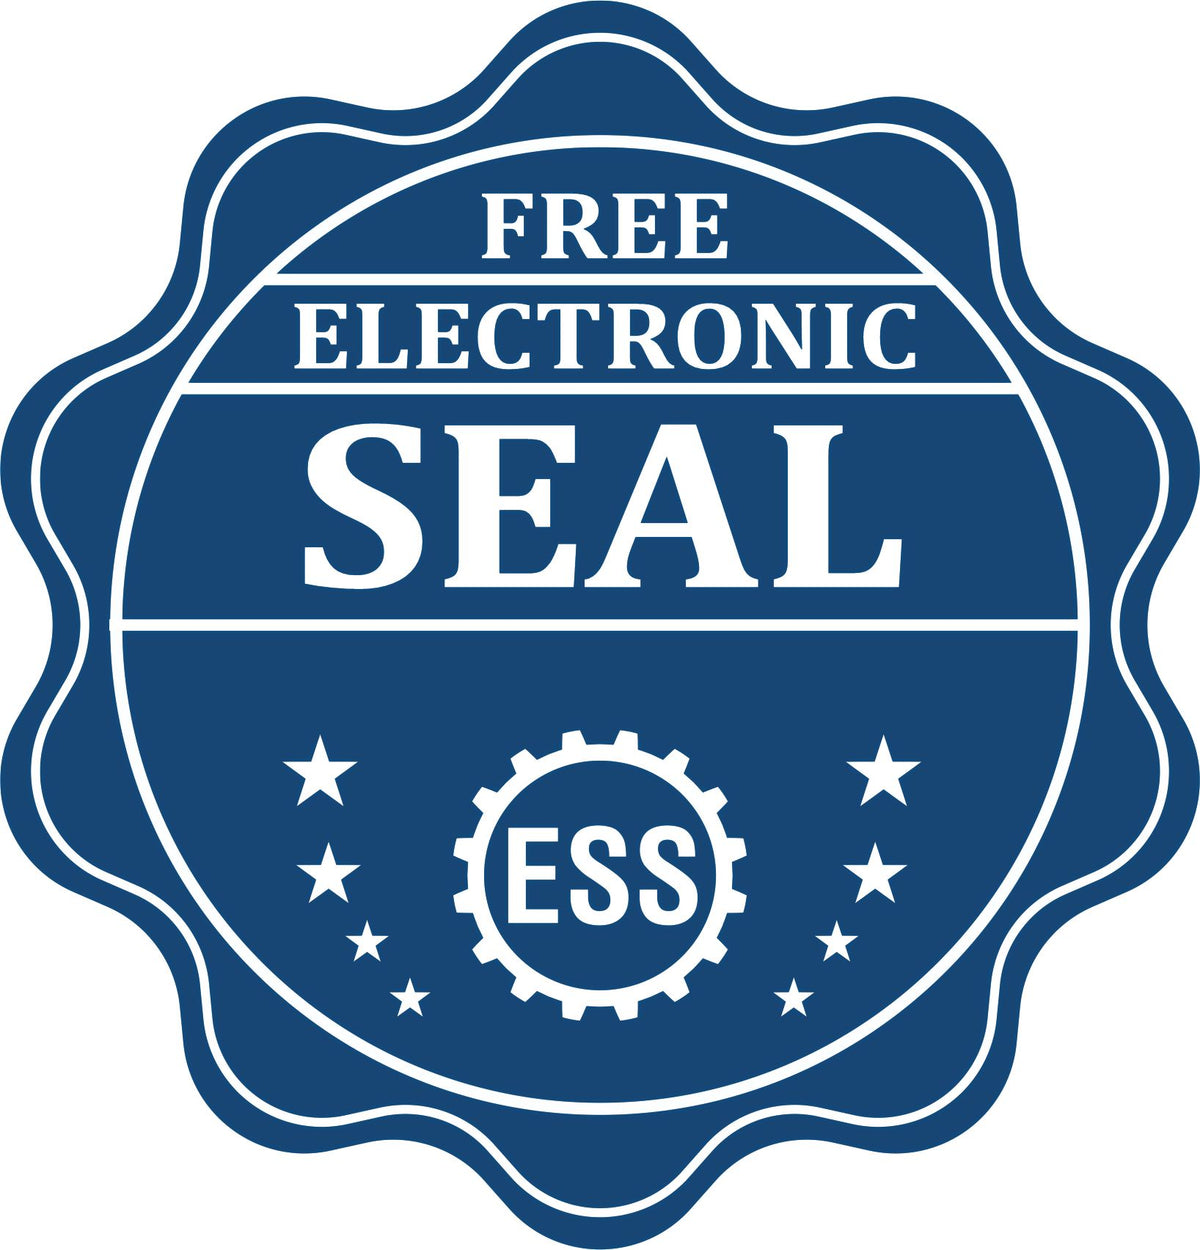 A badge showing a free electronic seal for the Soft Pocket Washington Landscape Architect Embosser with stars and the ESS gear on the emblem.